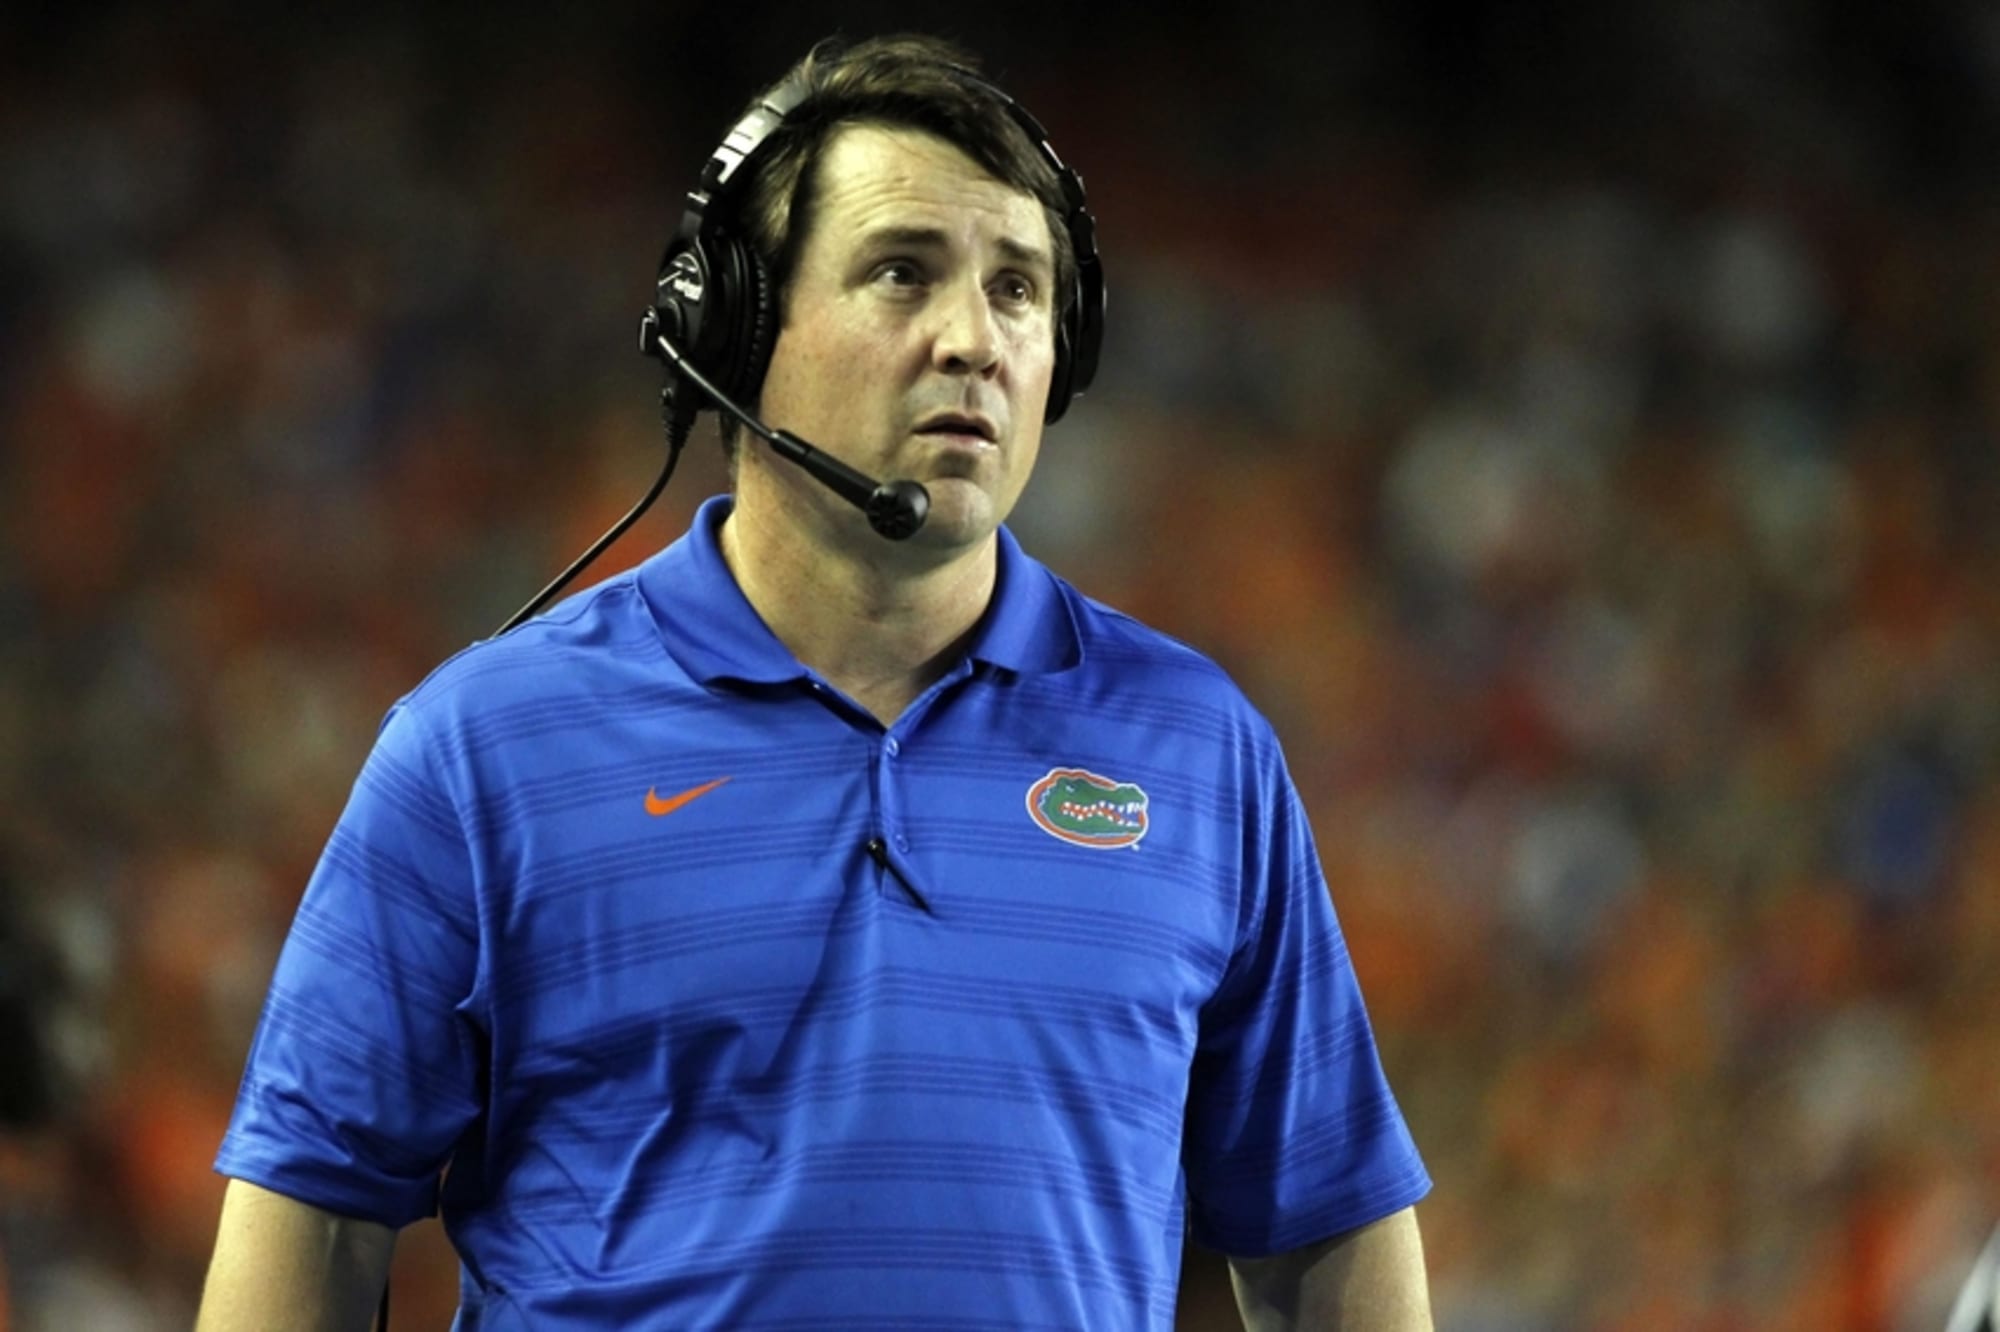 Florida Gators coach Will Muschamp to be evaluated following the season